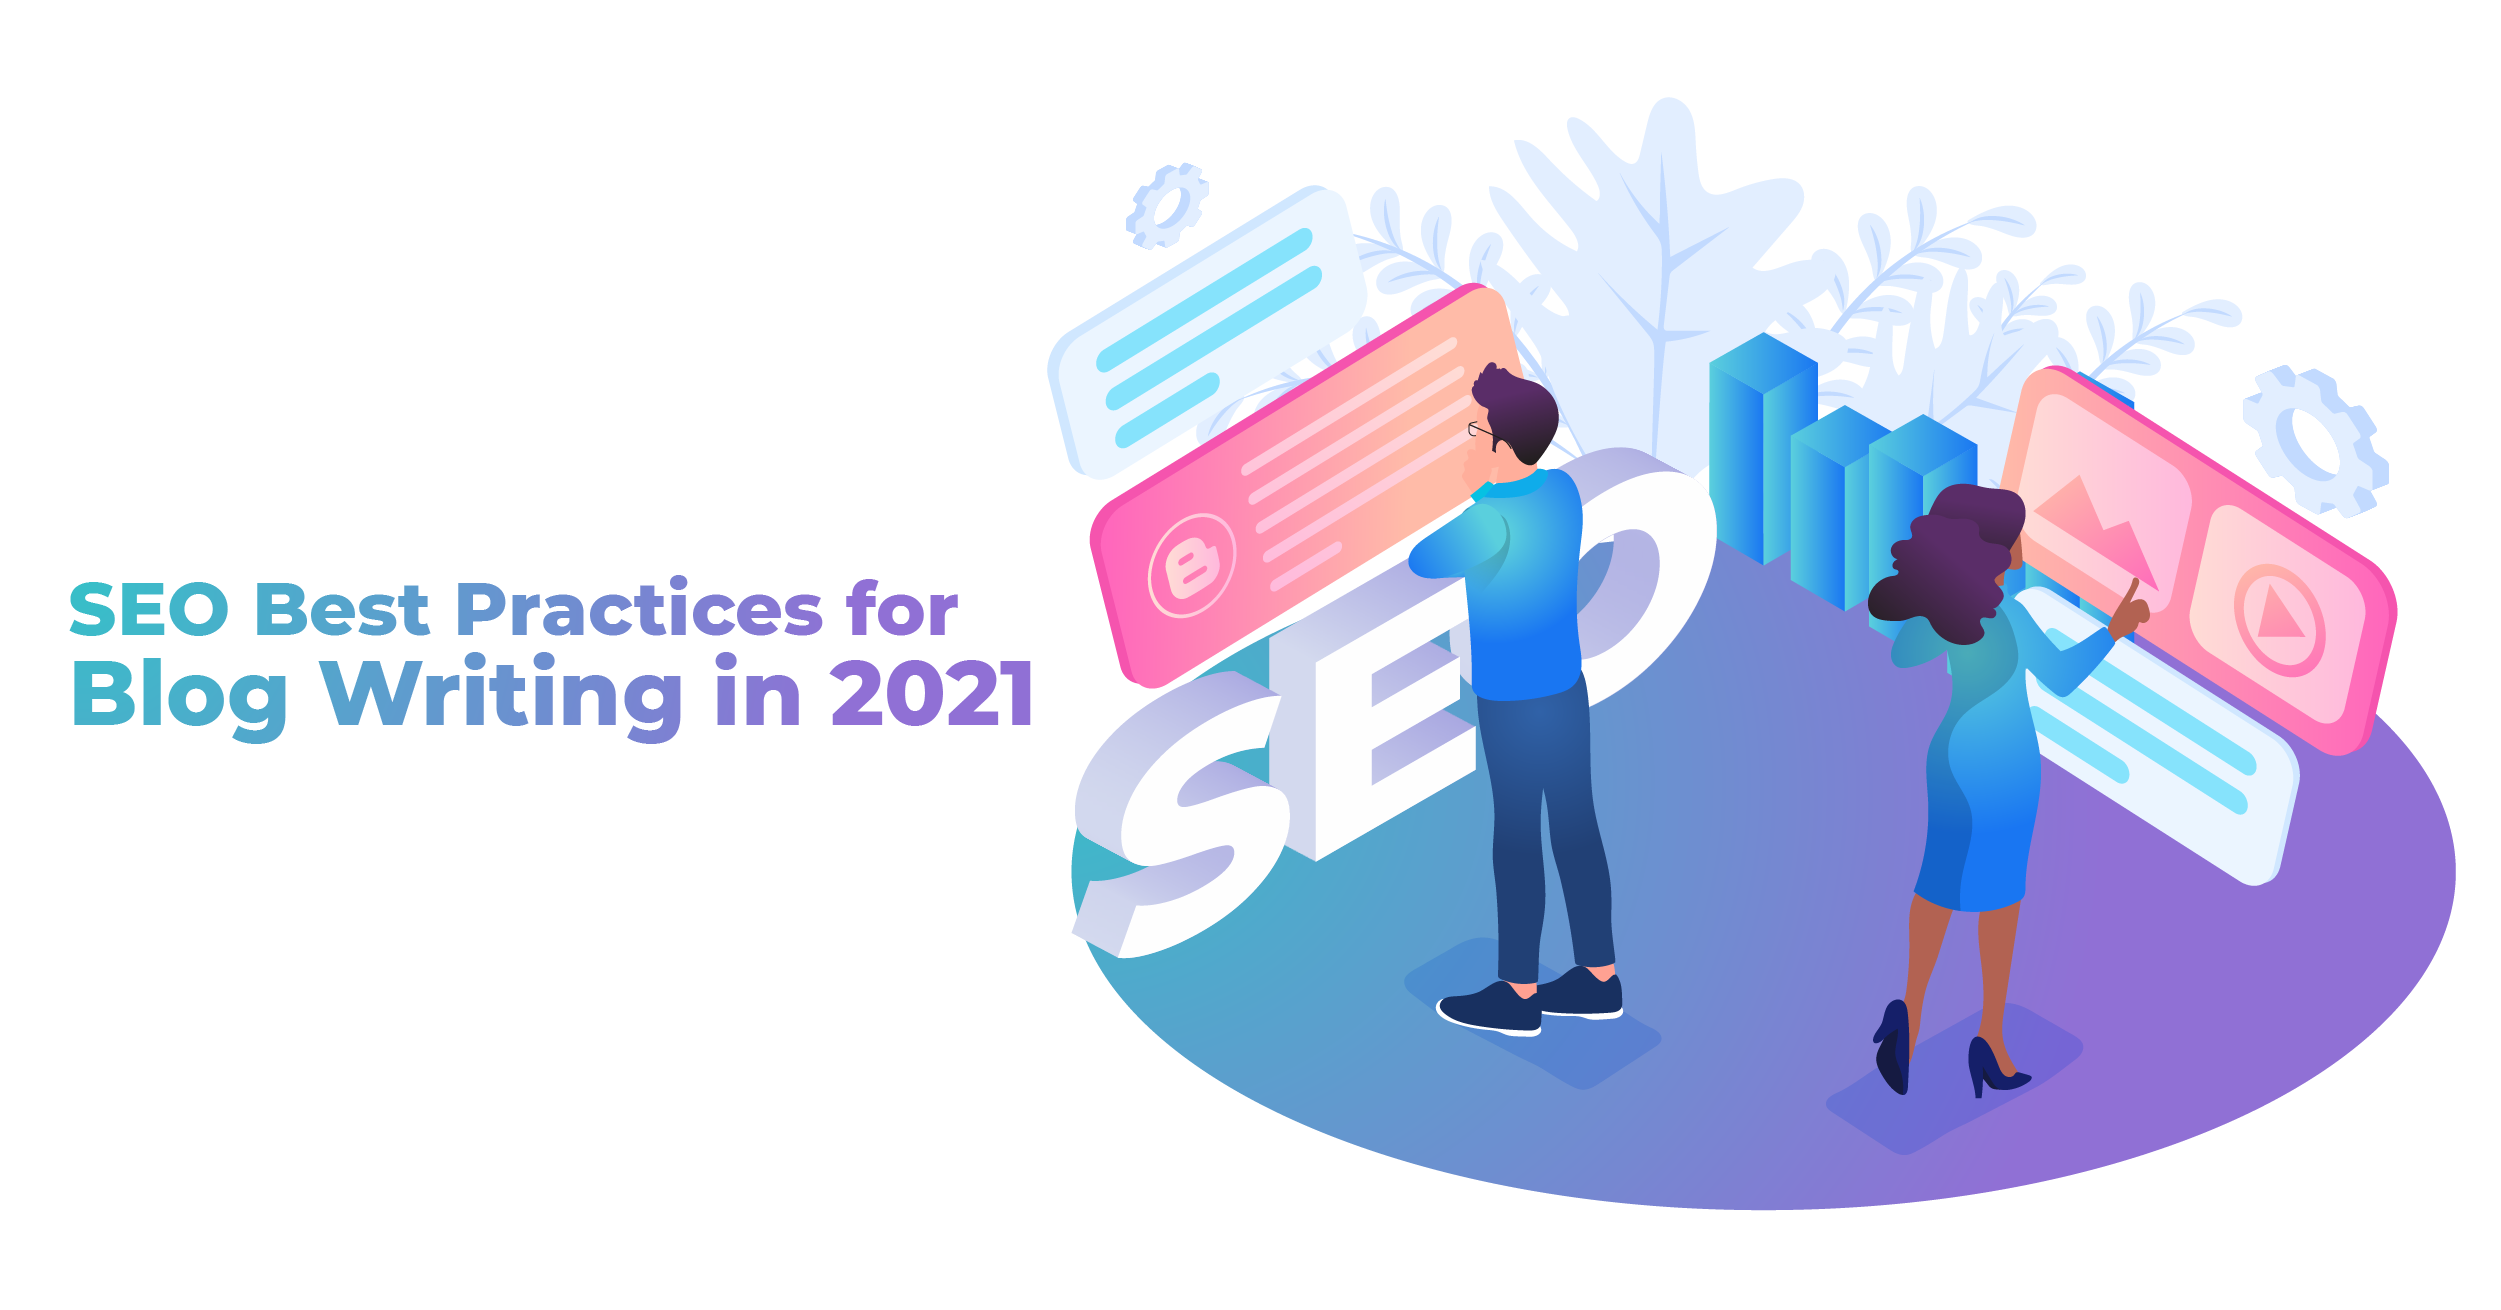 Top 3 SEO Best Practices for Blog Writing in 2021